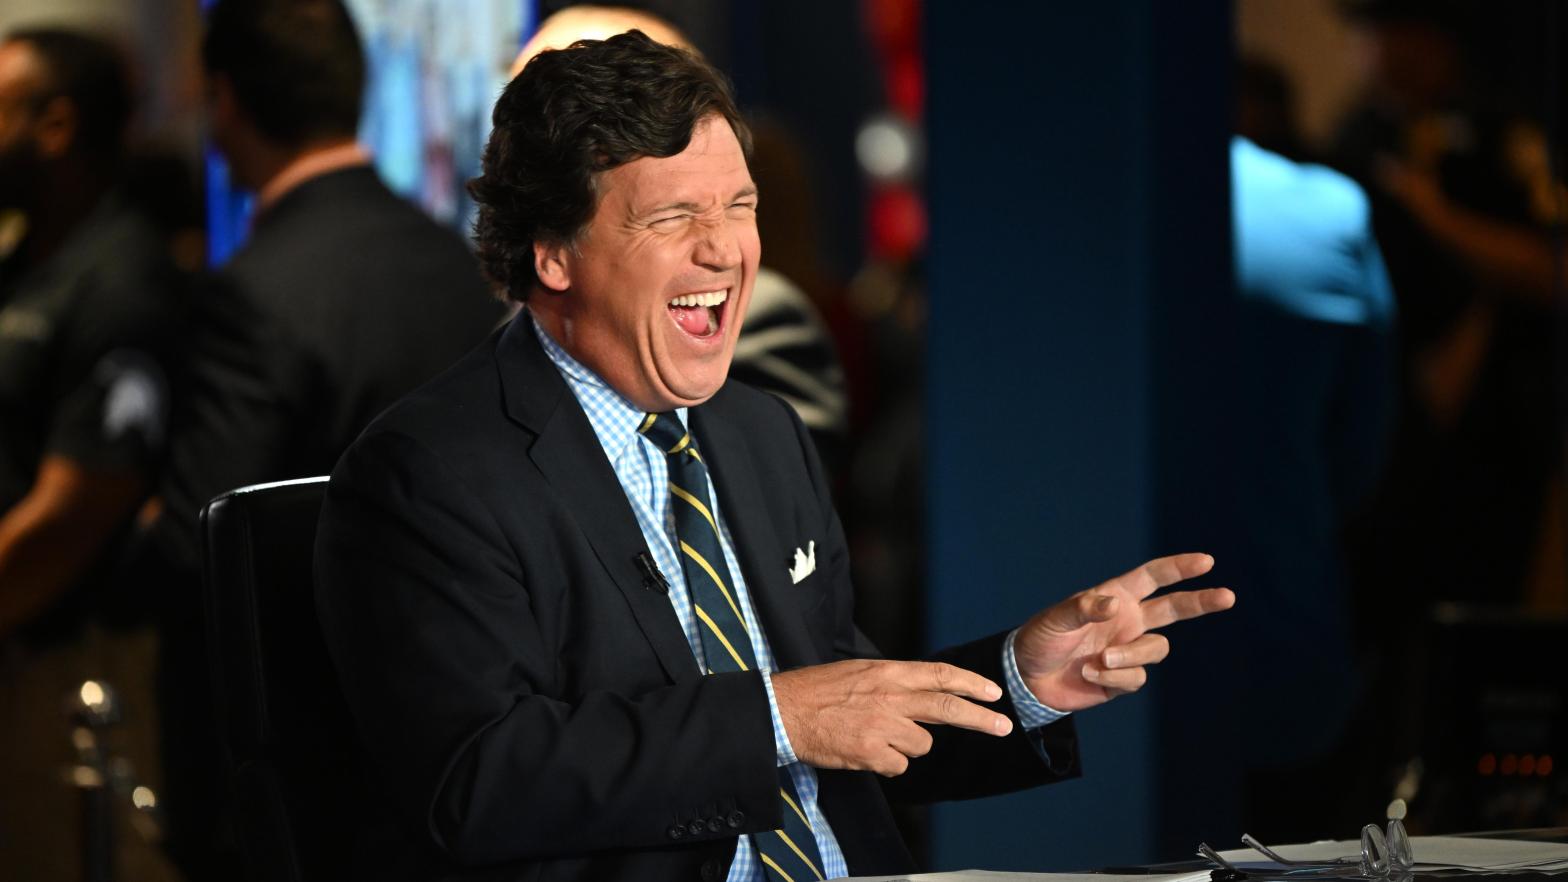 Tucker Carlson is out at Fox, but it remains unclear whether the network or host first called it quits. (Photo: Jason Koerner, Getty Images)